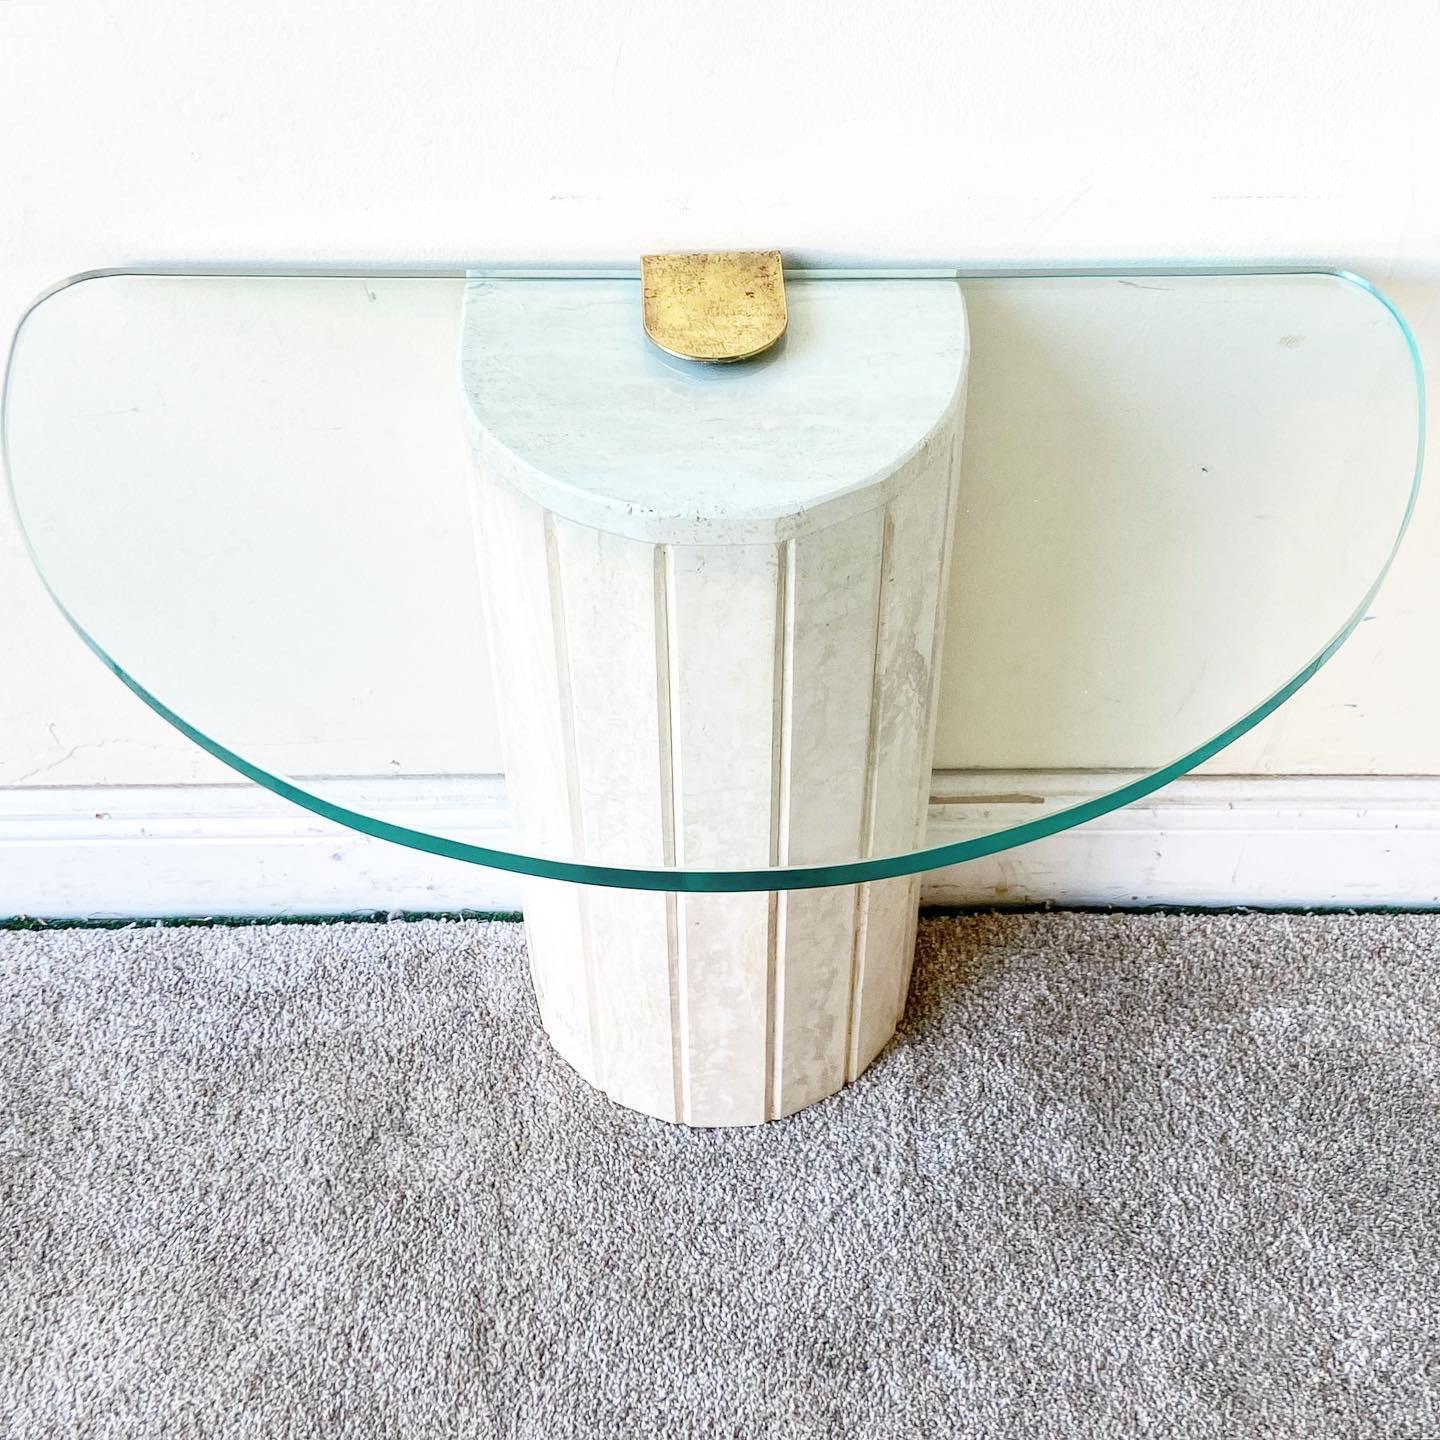 Elegant Demi lune glass top accent table with smooth travertine base connected by a metal rod and hidden with a piece of brass.

Additional information:
Material: Brass, Glass, Marble
Color: Beige, Gold, Tan
Style: Italian, Postmodern
Time Period: